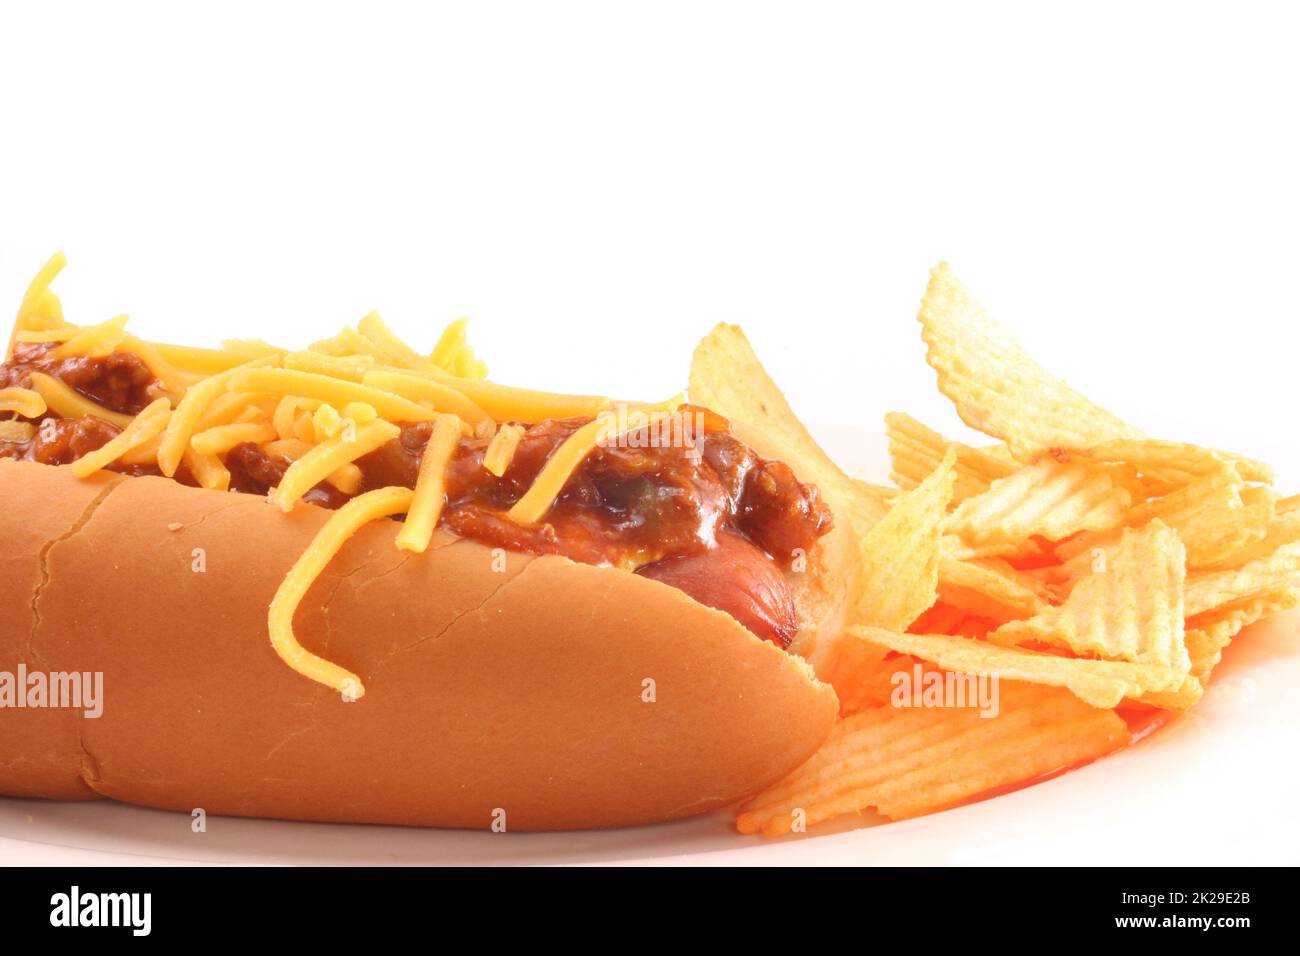 Hot Dog with Chili and Cheese with Chips Isolated on White Stock Photo